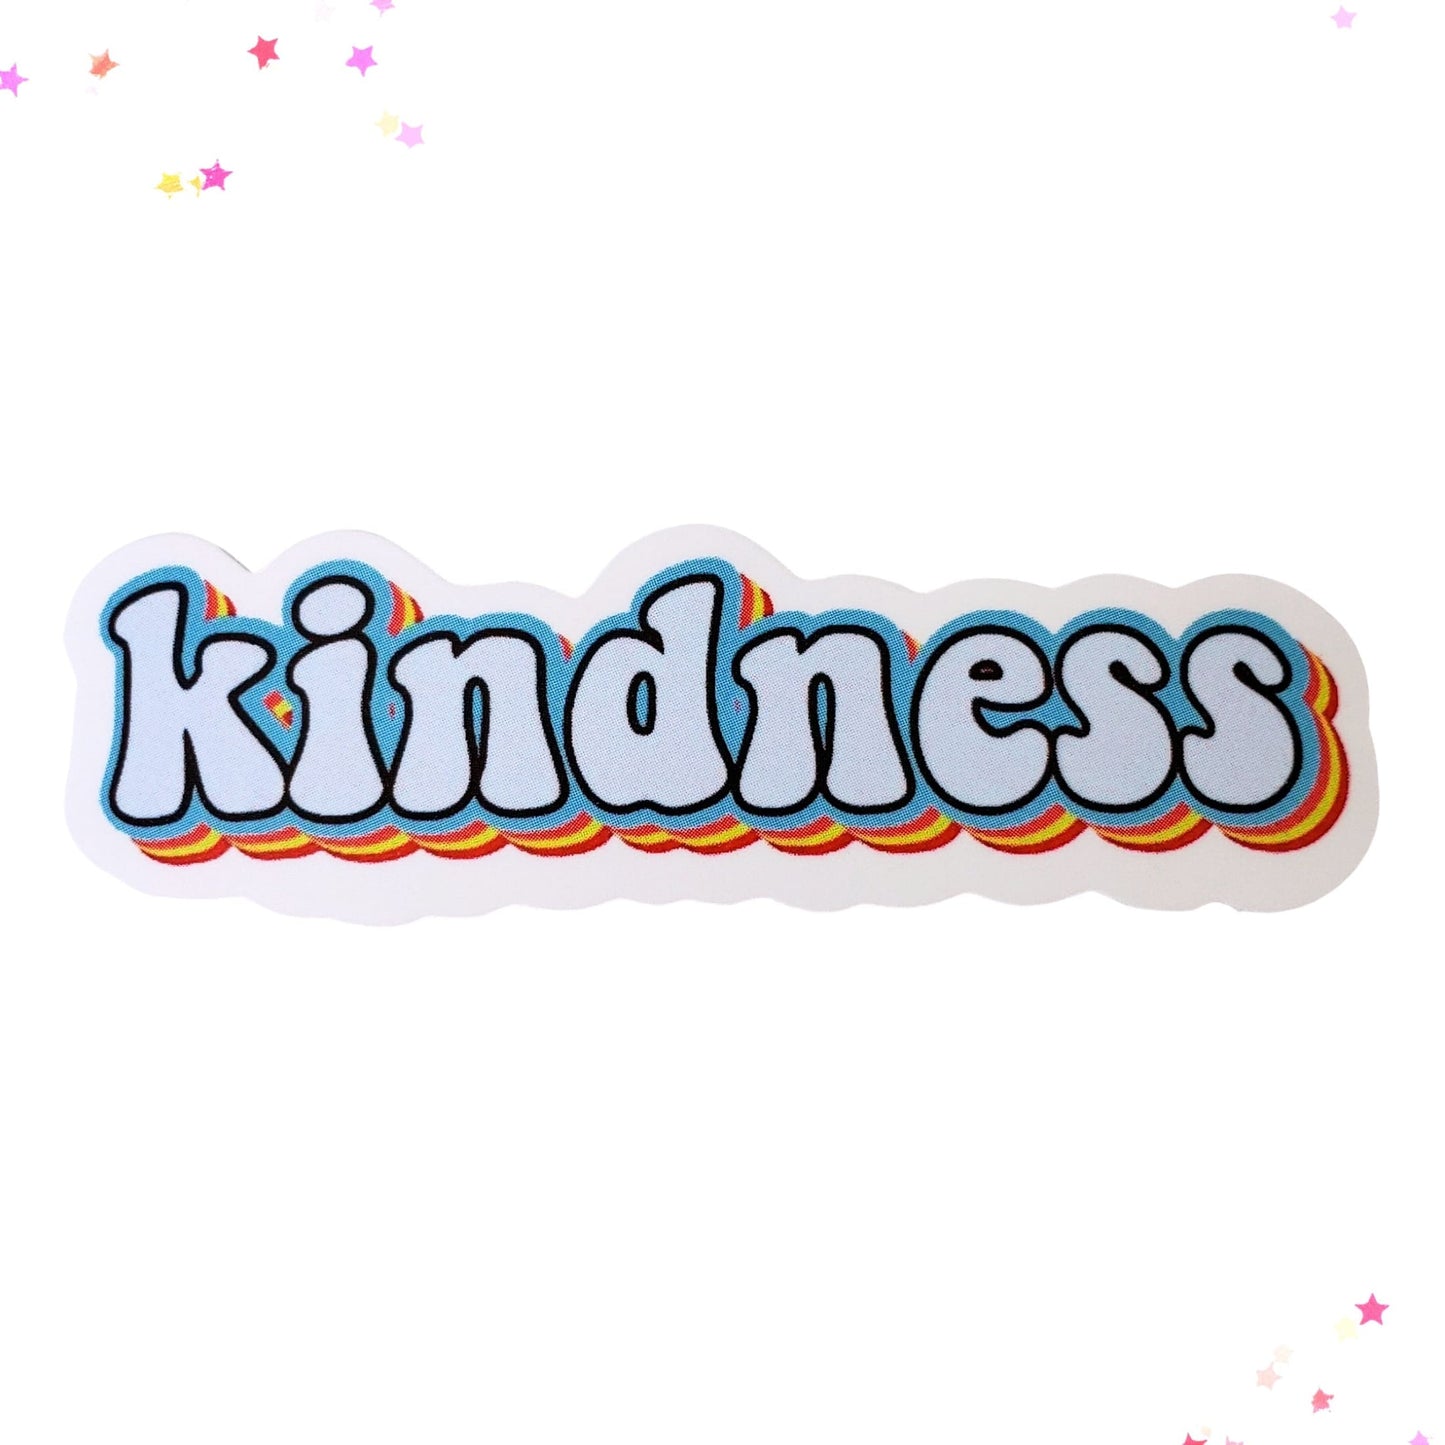 Retro Kindness Waterproof Sticker from Confetti Kitty, Only 1.00